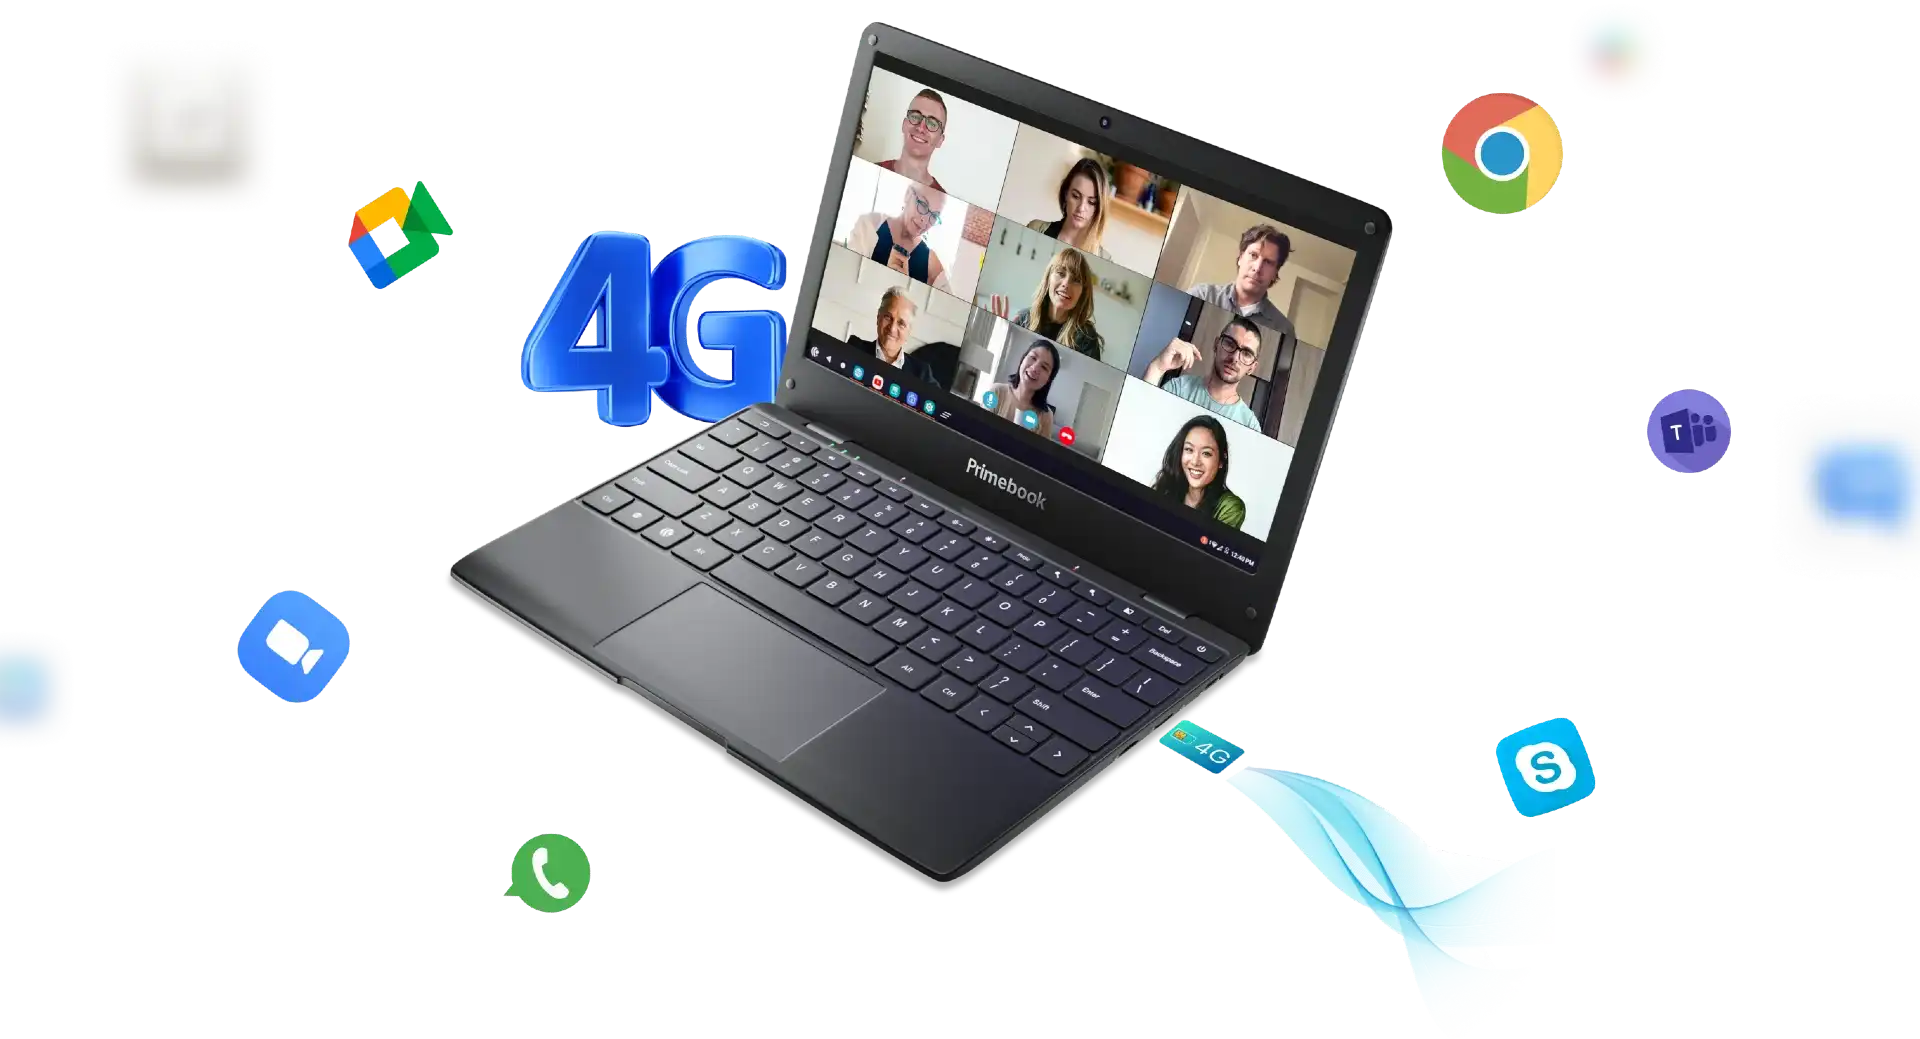 Nine people videocalling via zoom on primebook laptop and 4g, google chrome, microsoft team, google meet, whatsapp and 4 4g sim are displaying in the screen